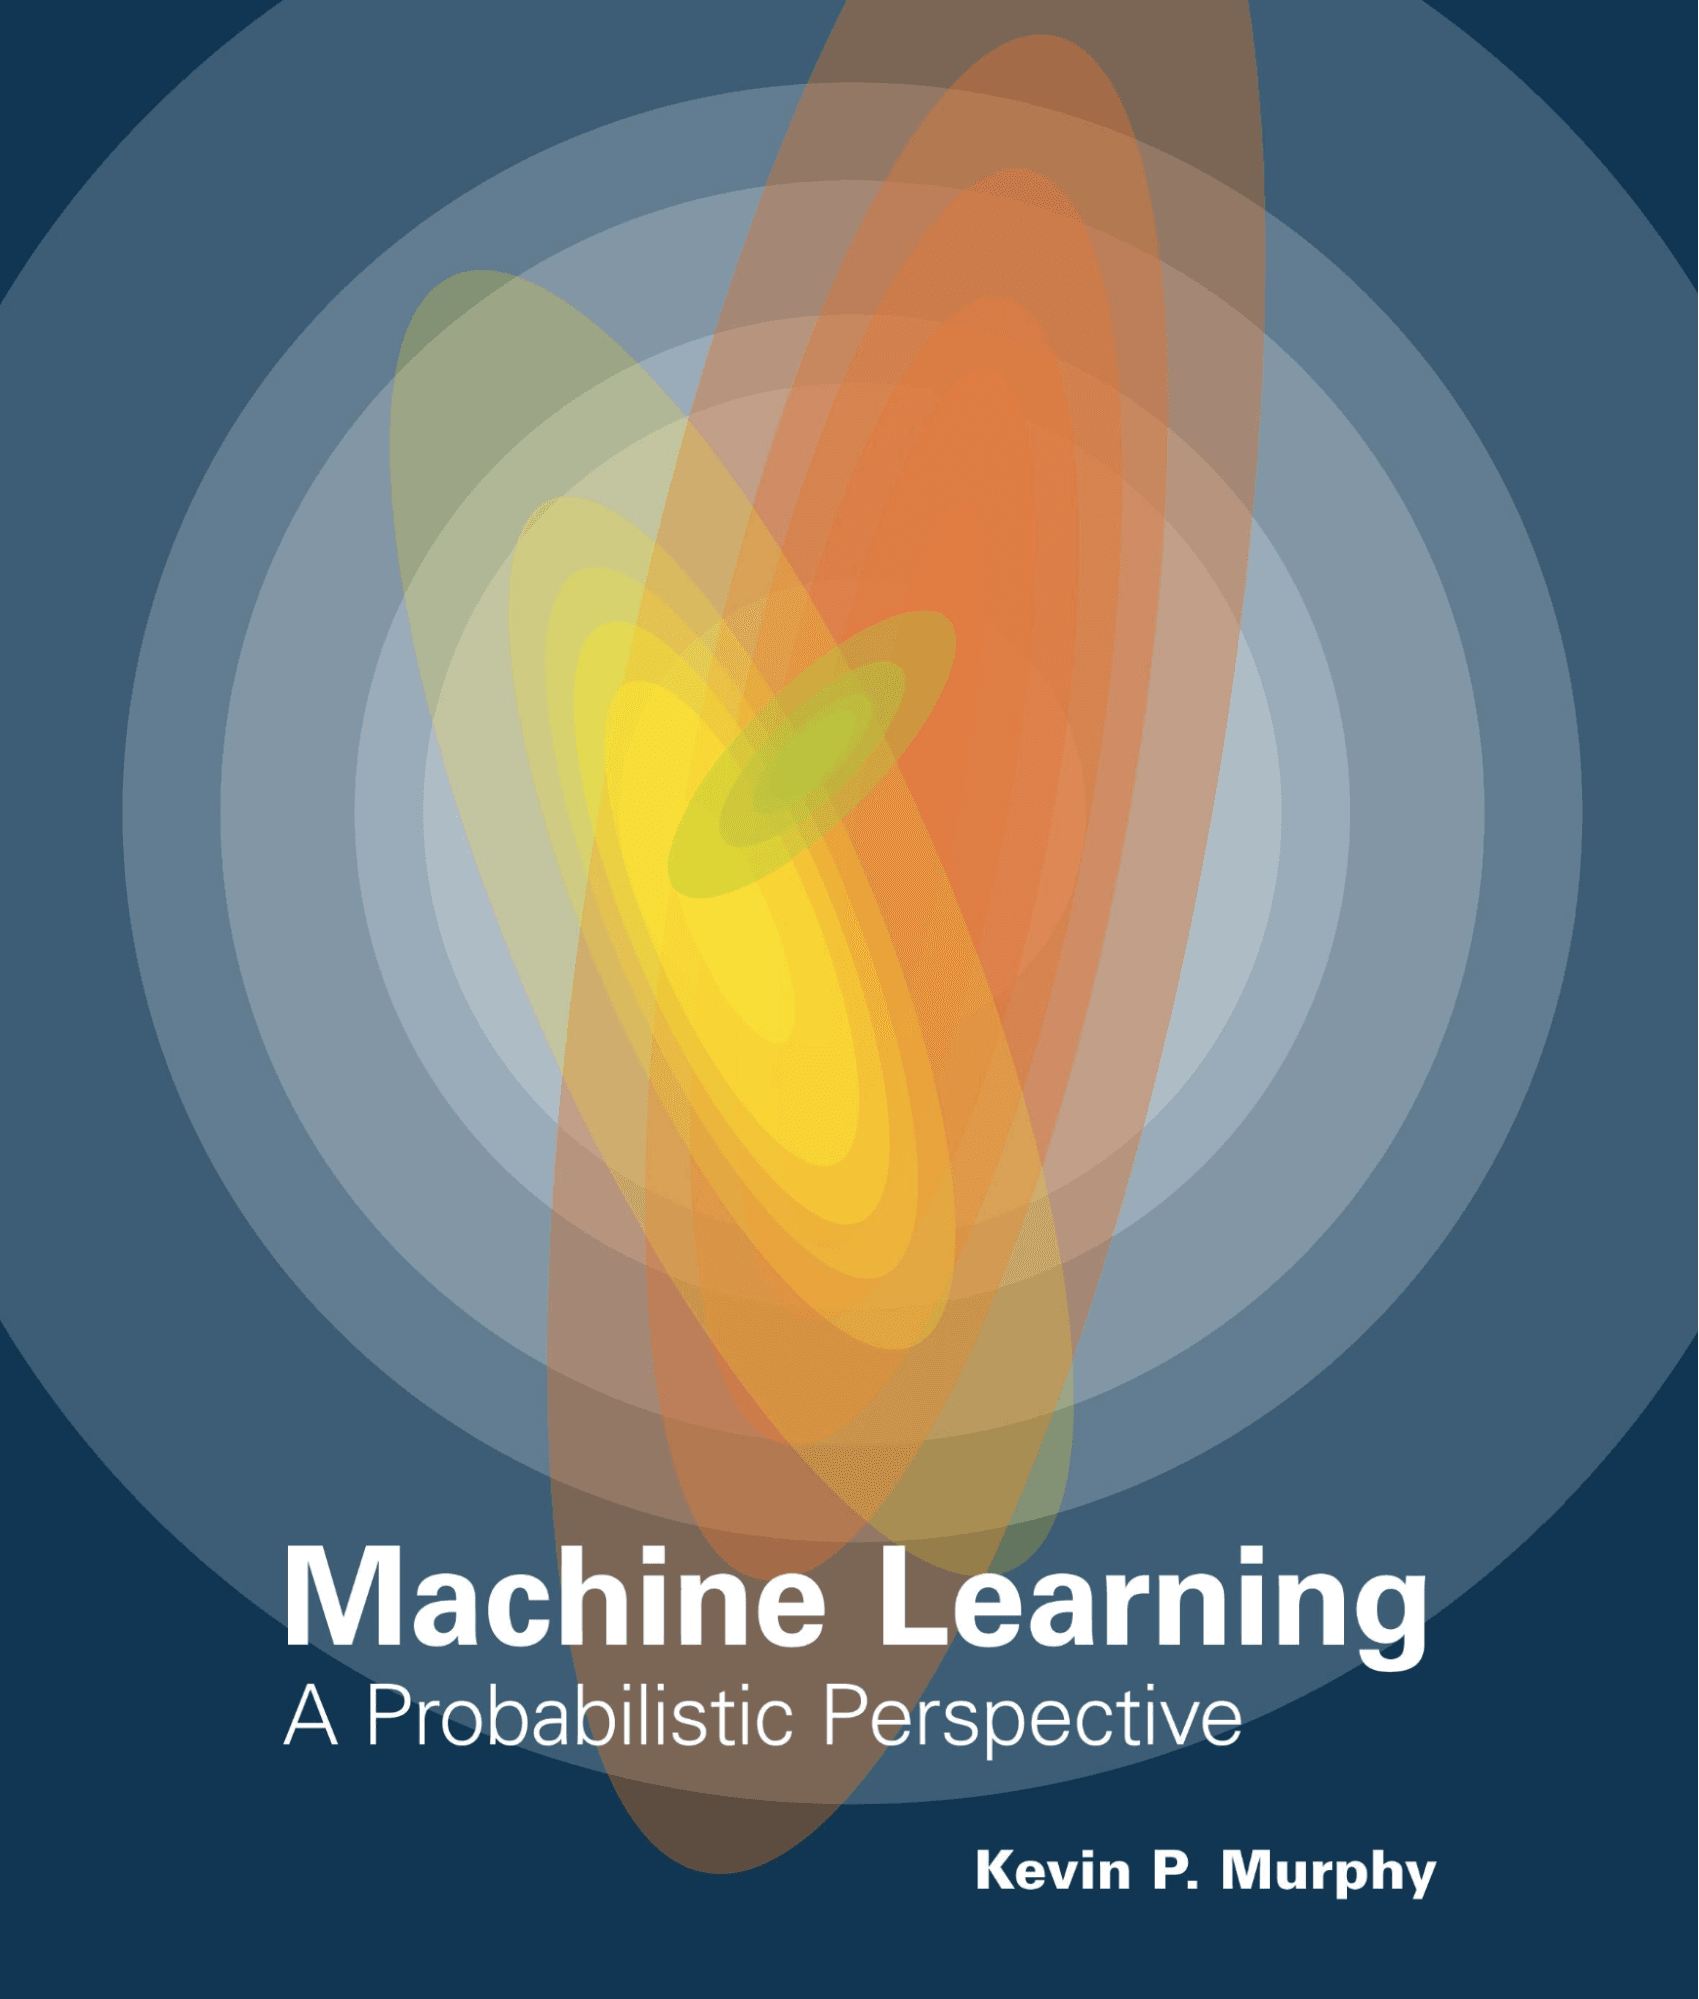 Machine Learning: A Probabilistic Perspective de Kevin P. Murphy